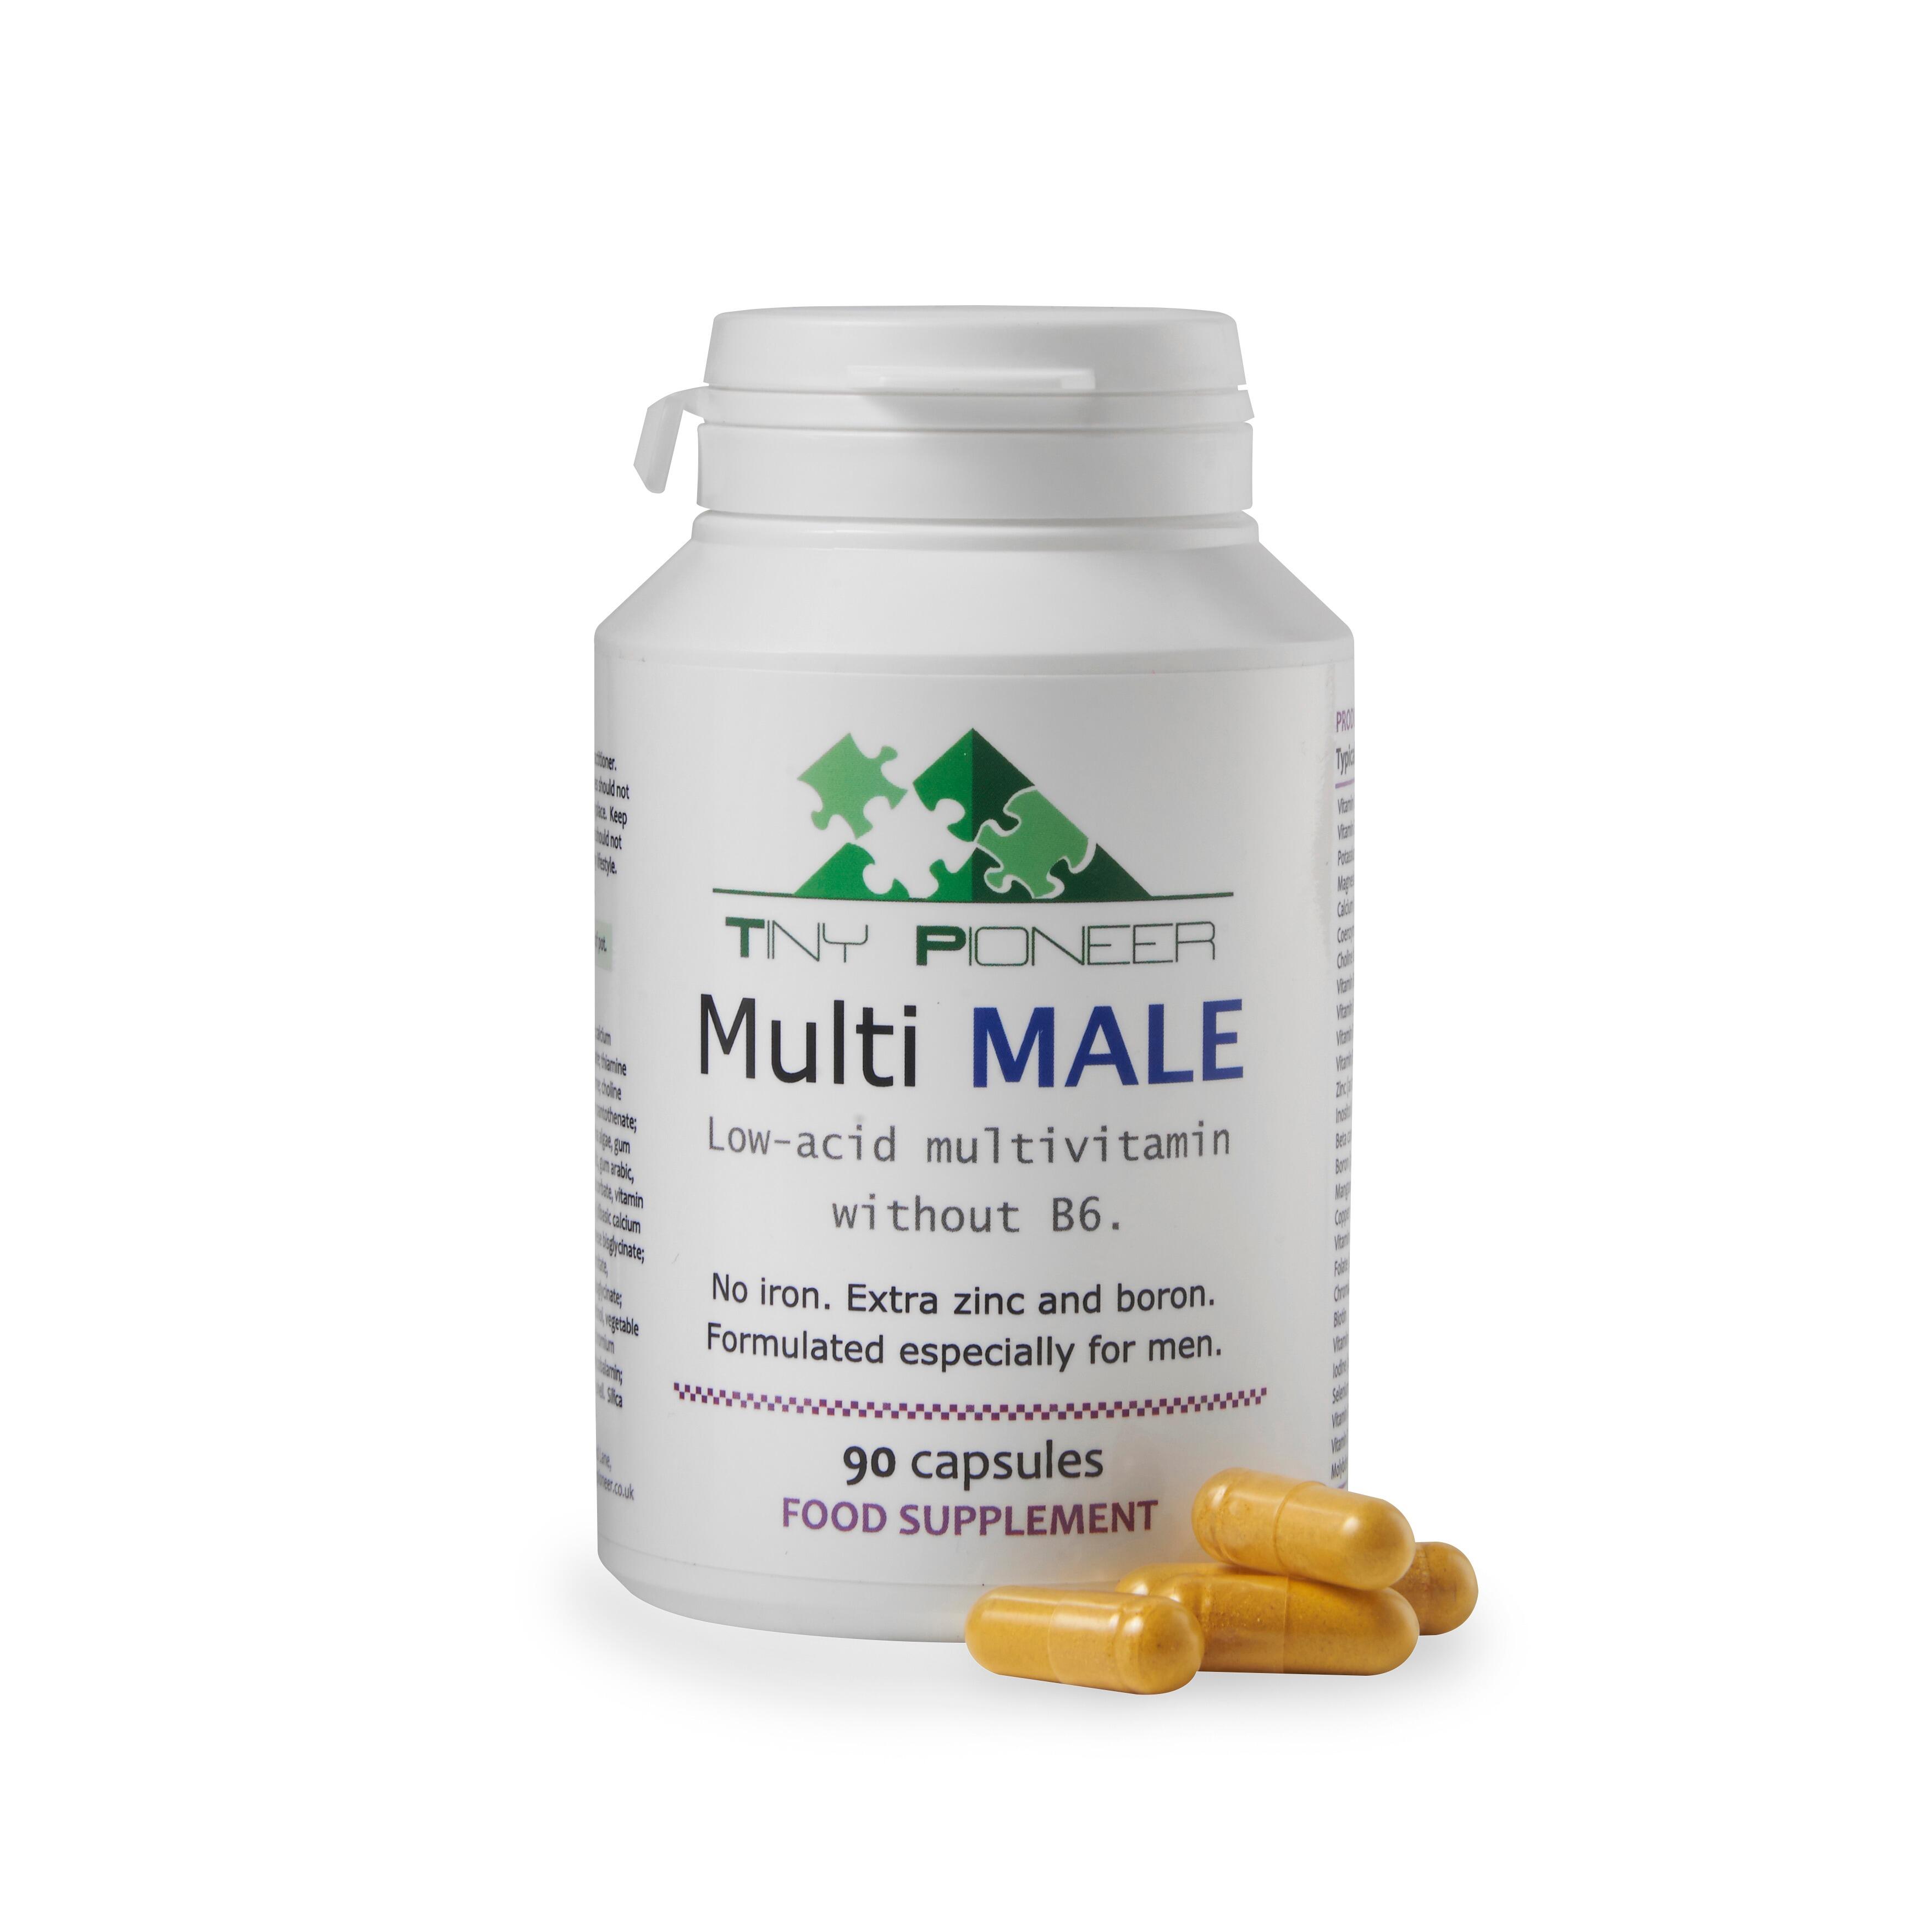 Low-acid multivitamin without B6